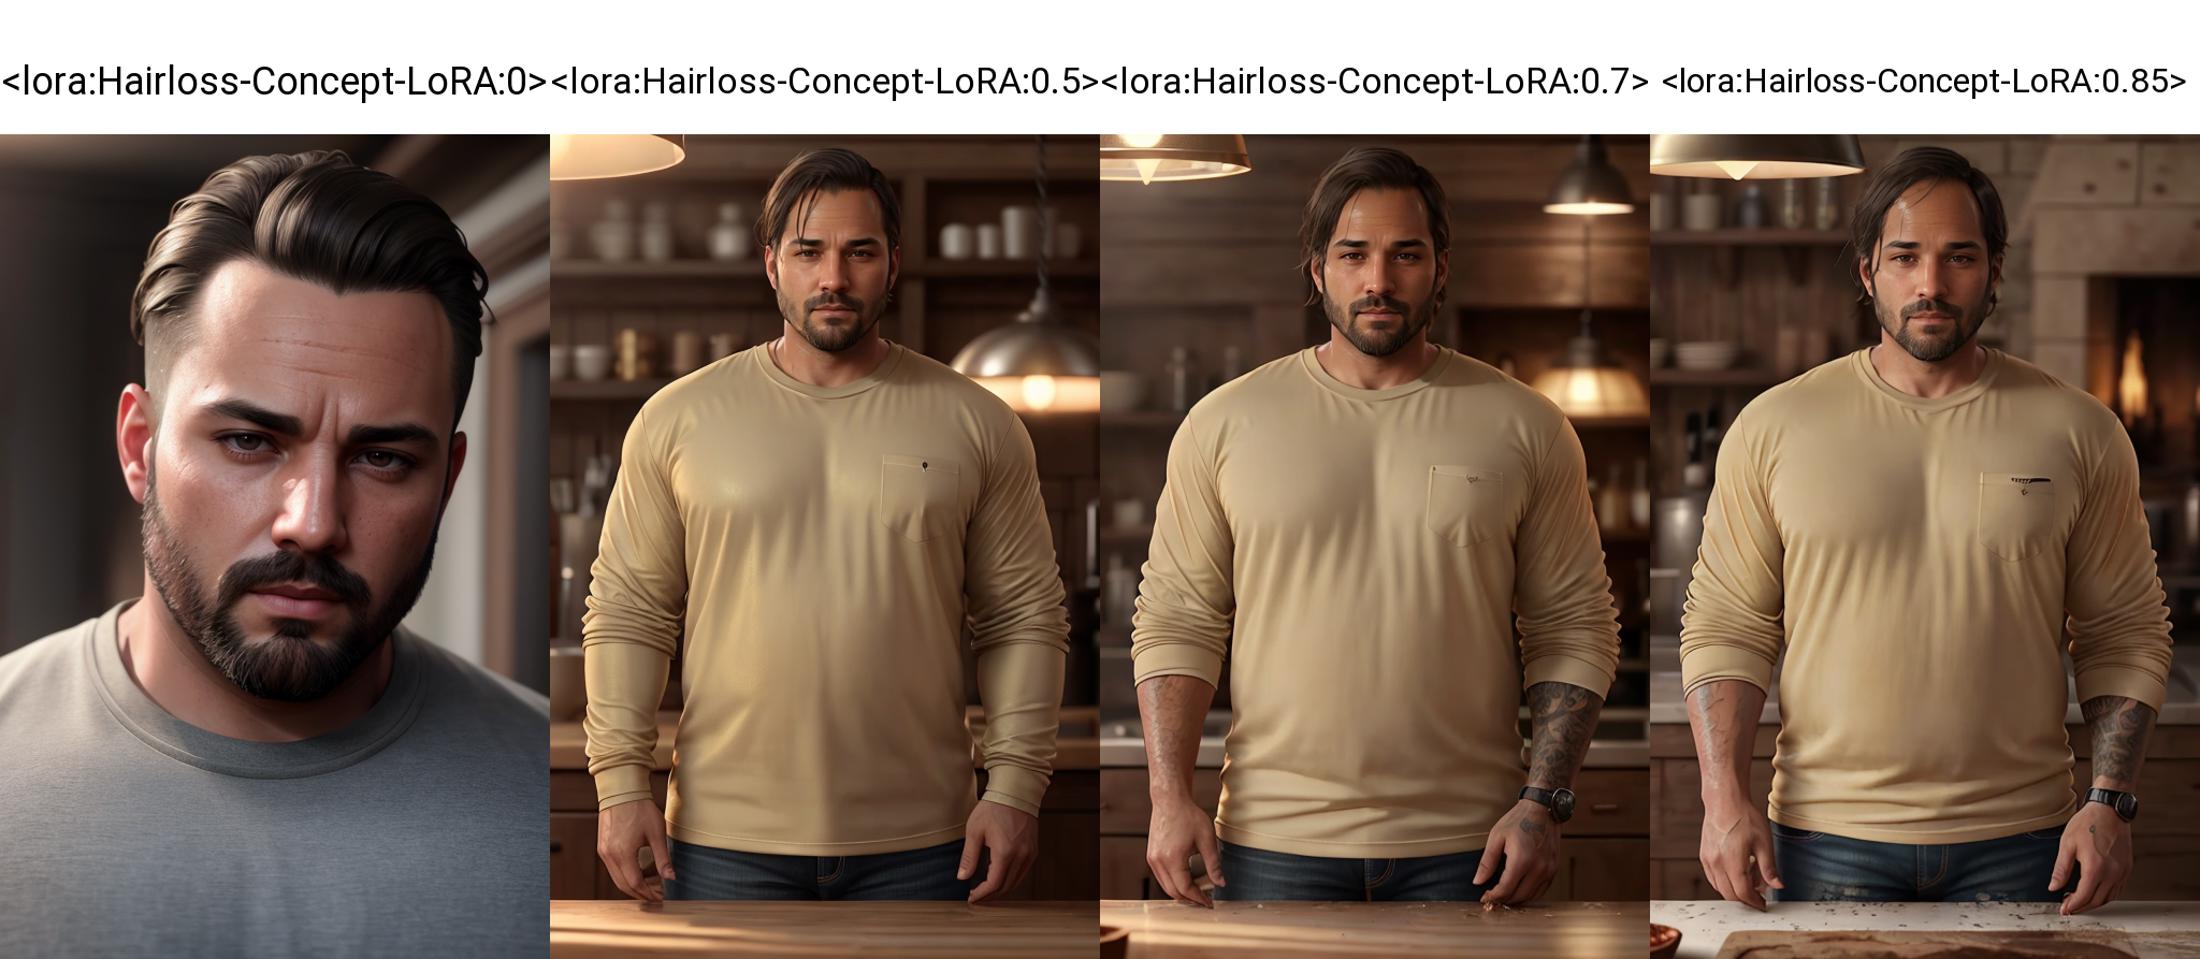 Hairloss Concept image by airesearch